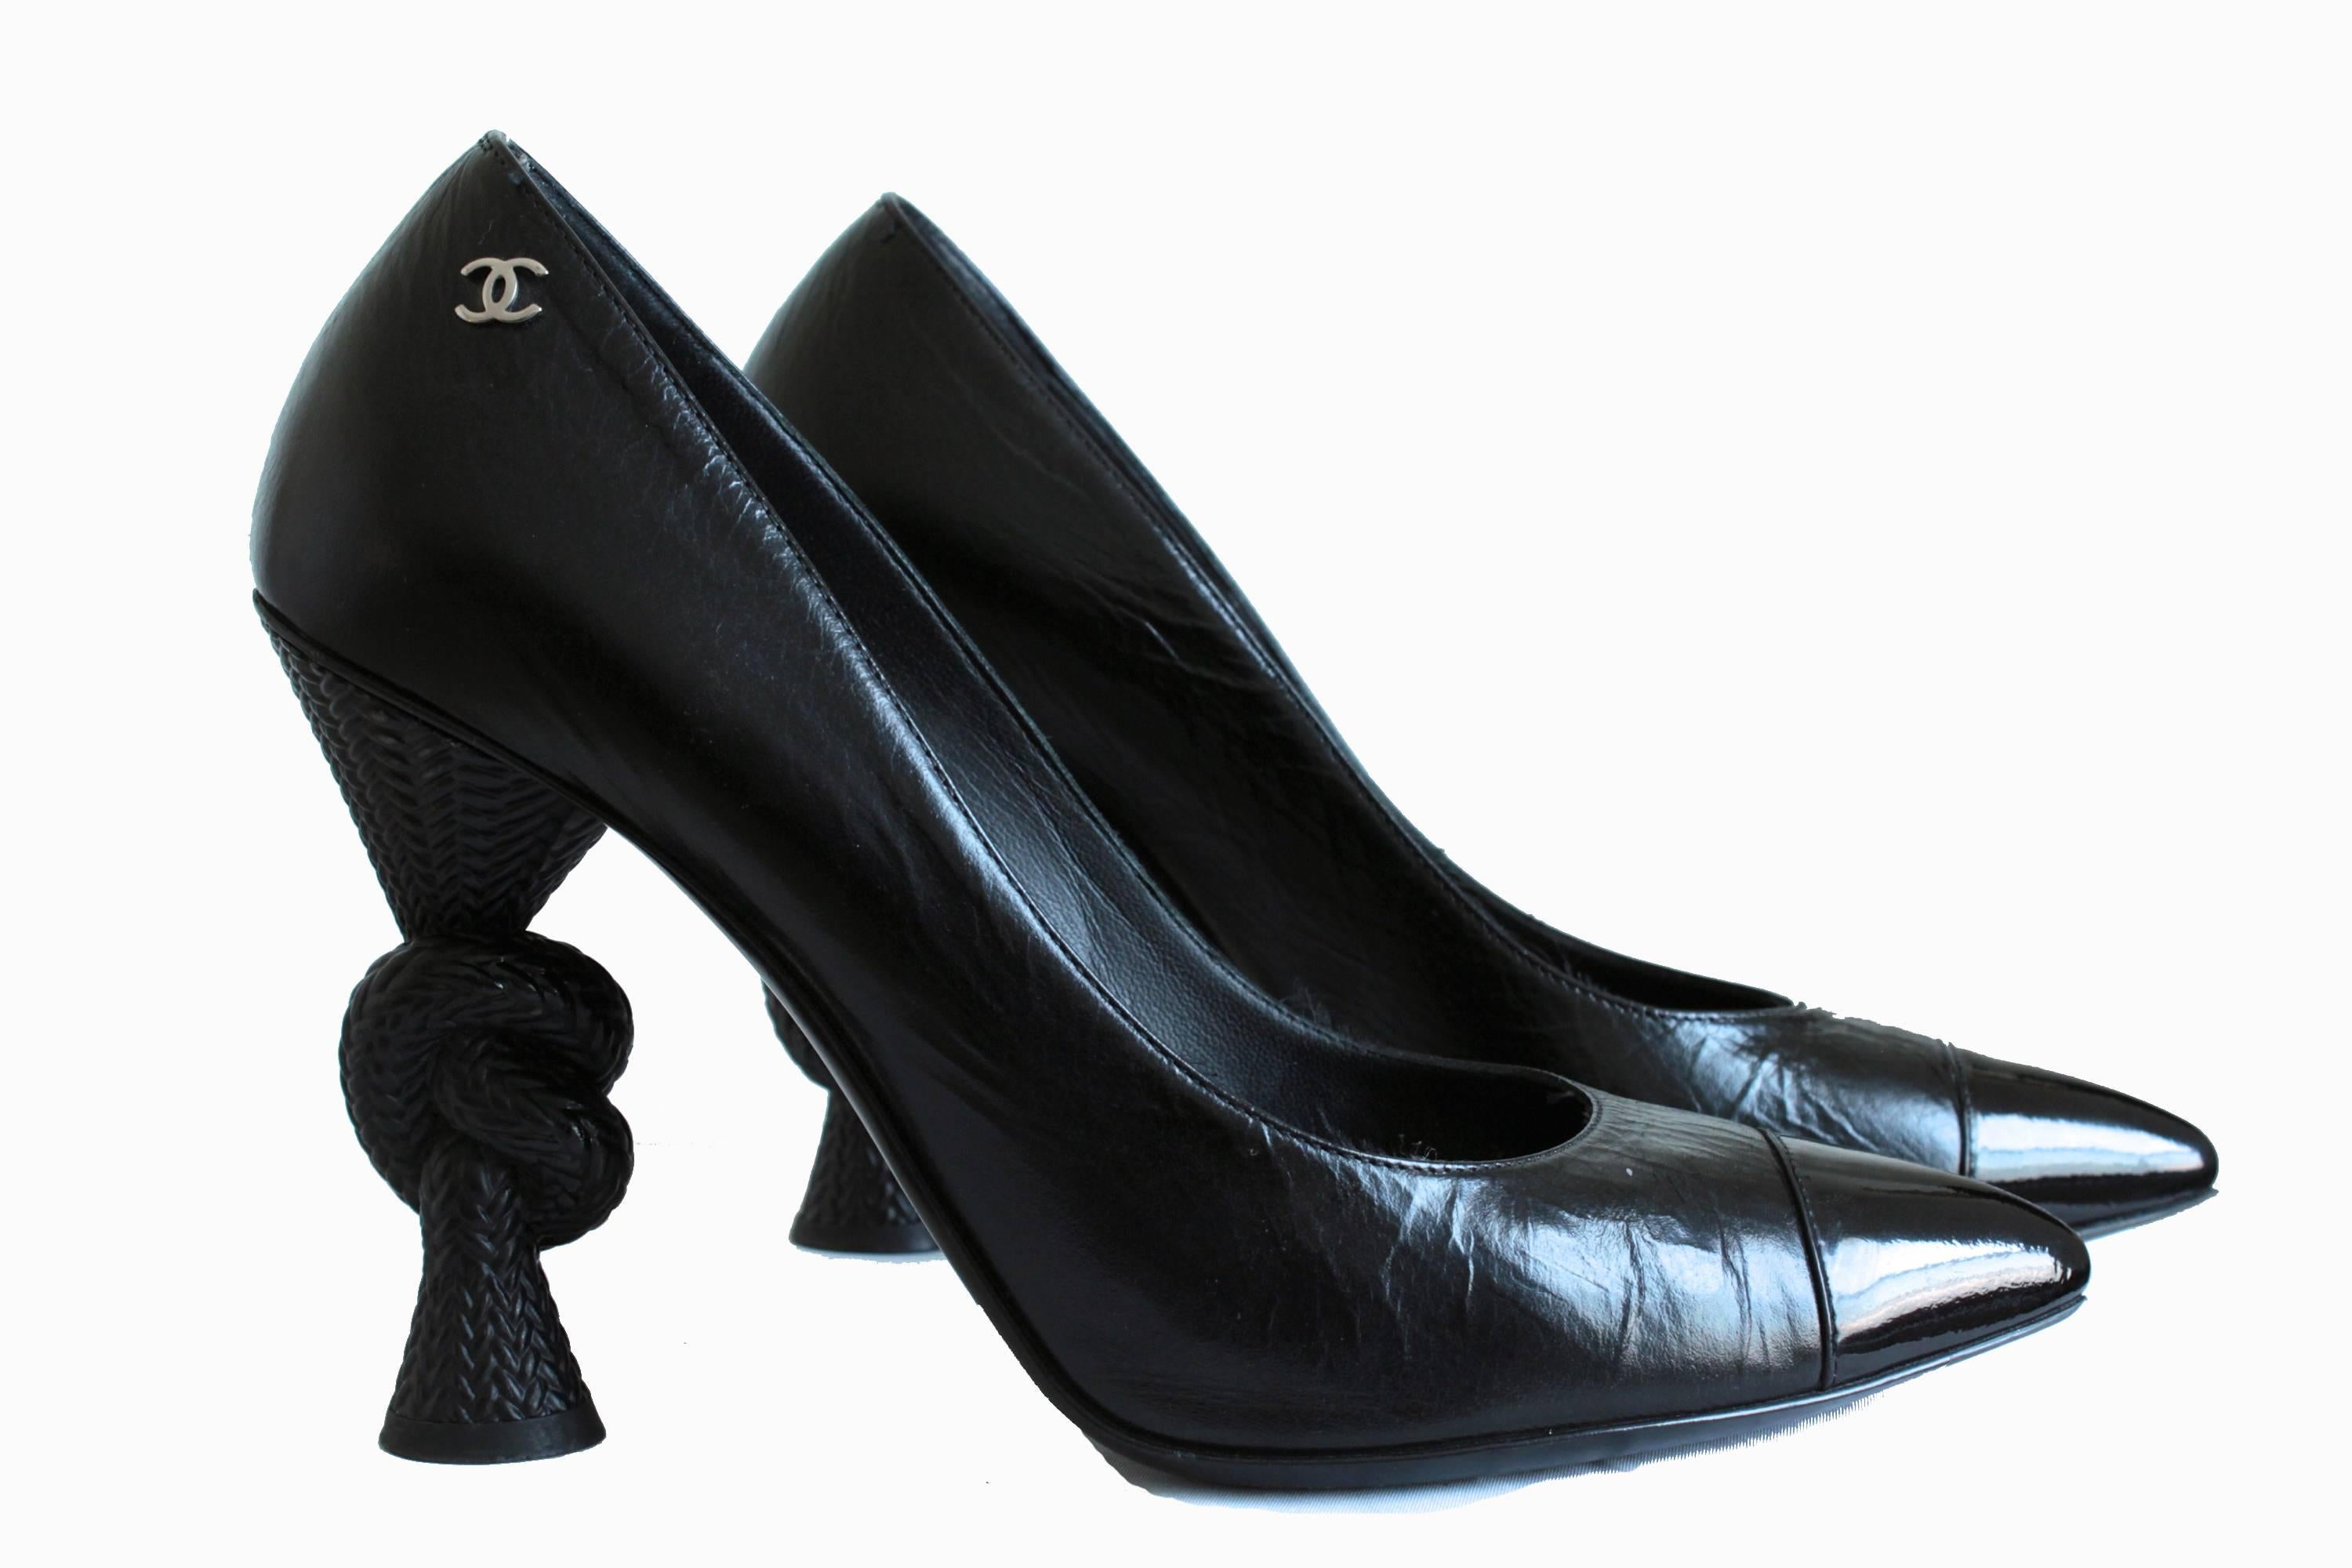 Released as part of the 2014 Resort collection and now impossible to find, this pair of knot heels are made from black leather with patent toe caps.  In very good condition overall, we note some dings to the black resin on the knot heels, and wear